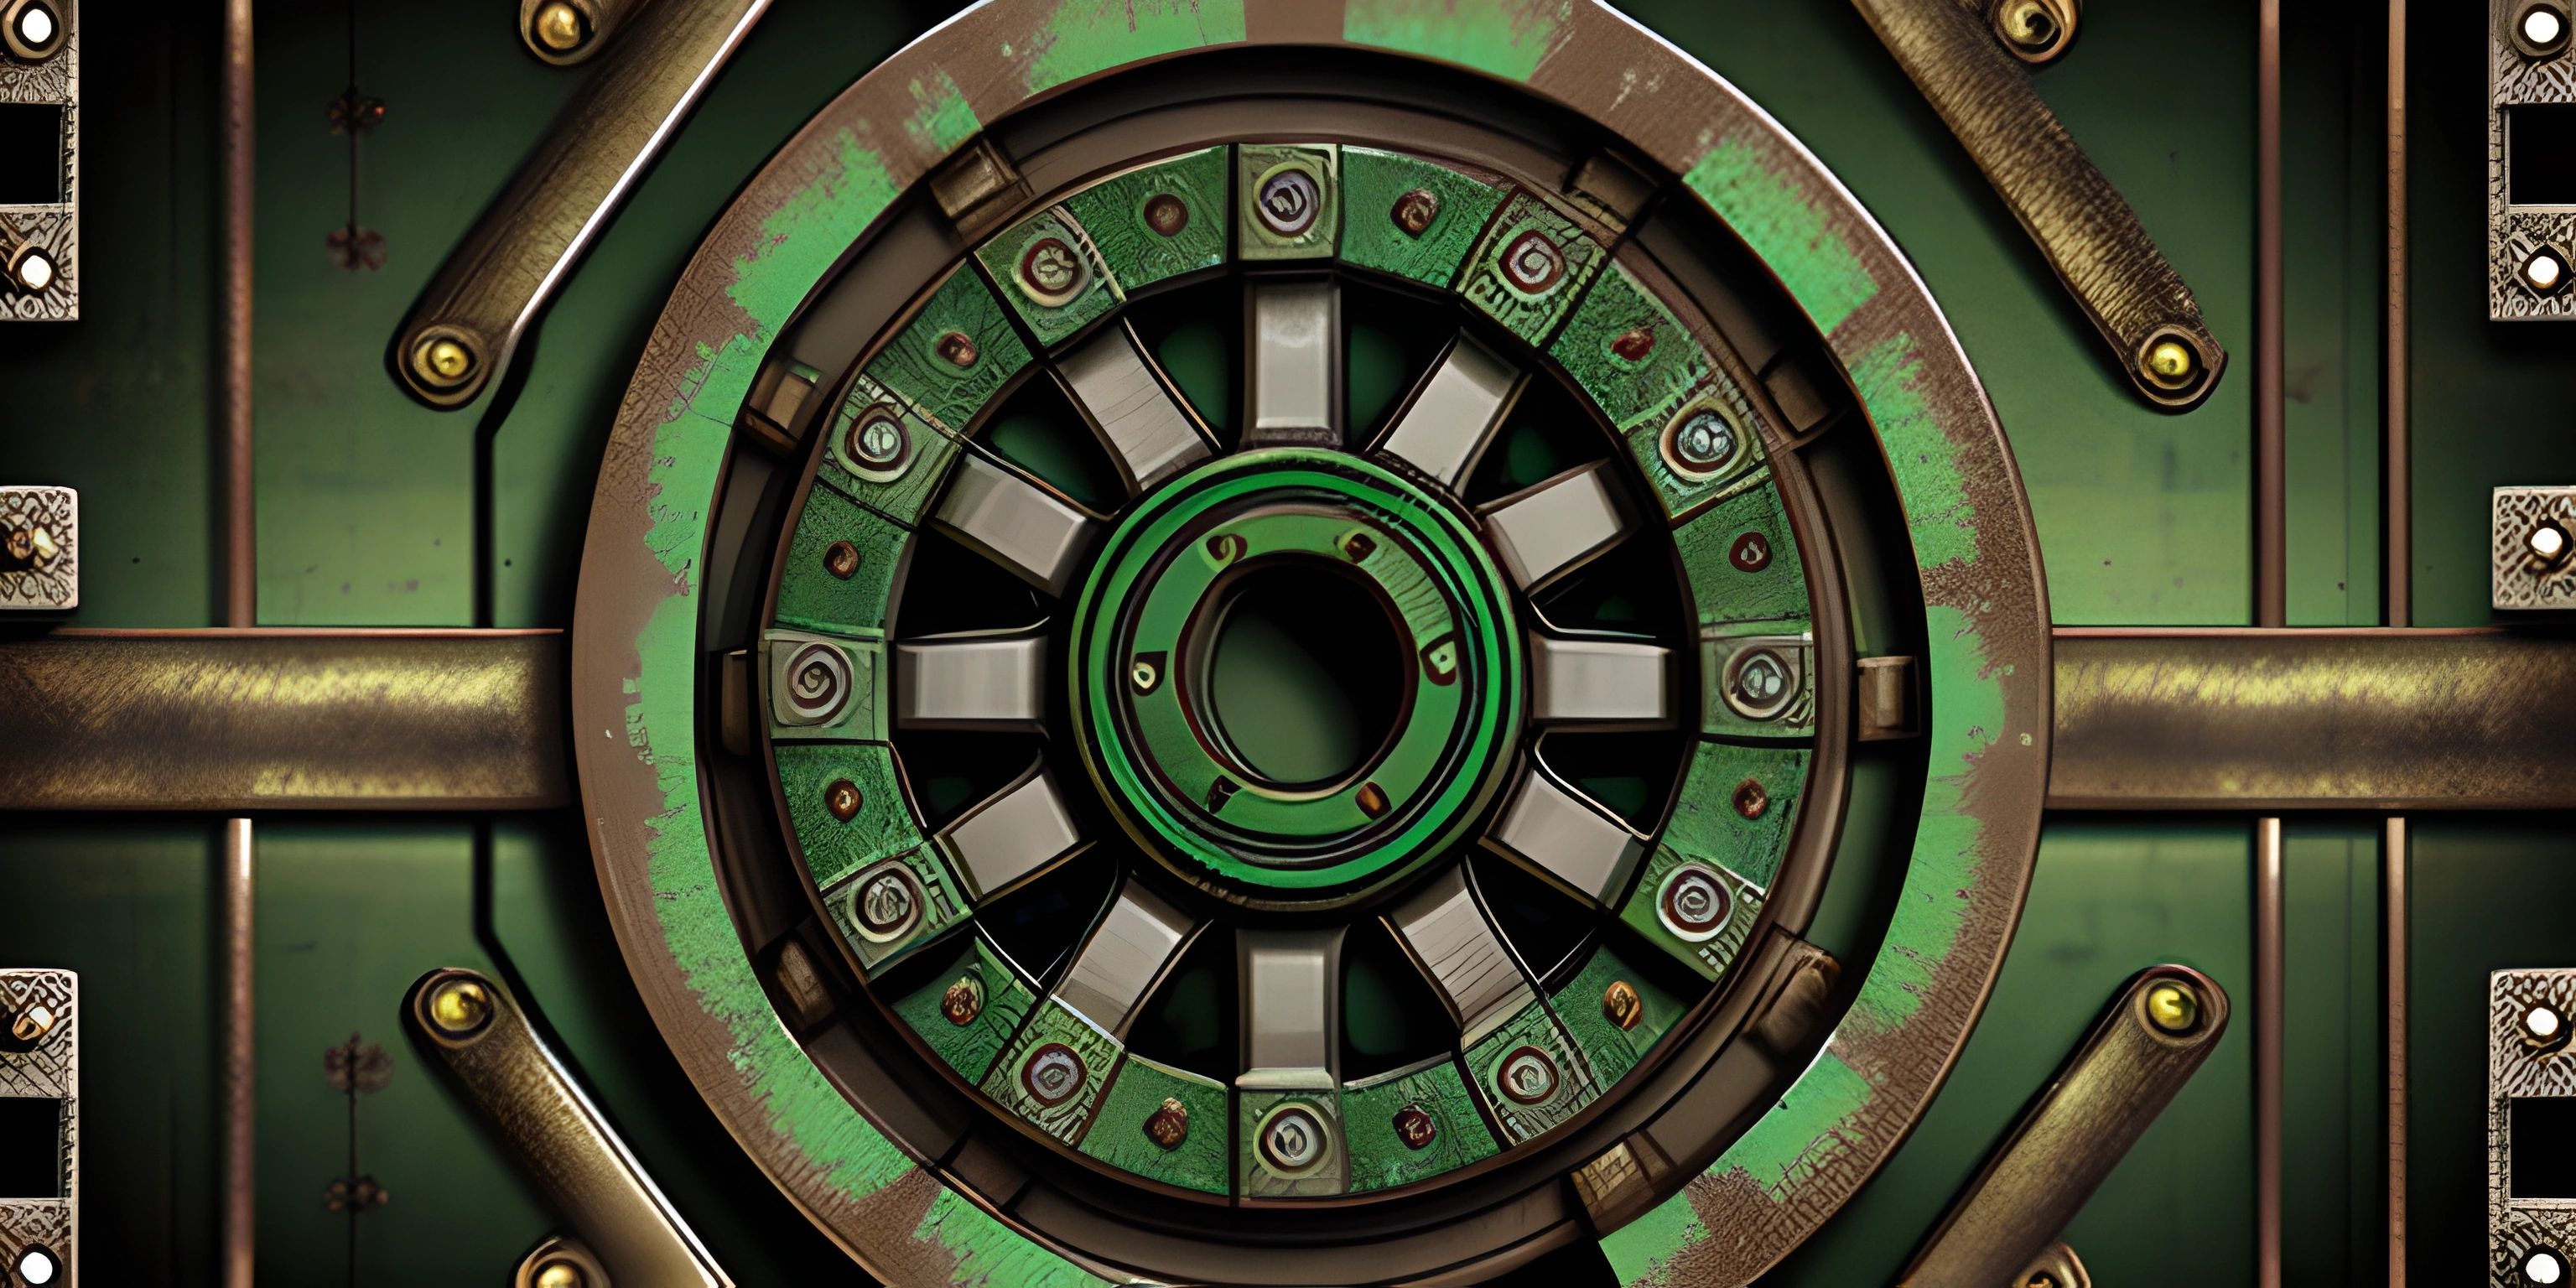 a computer monitor showing an eye and circle design on a green screen background of a bank vault